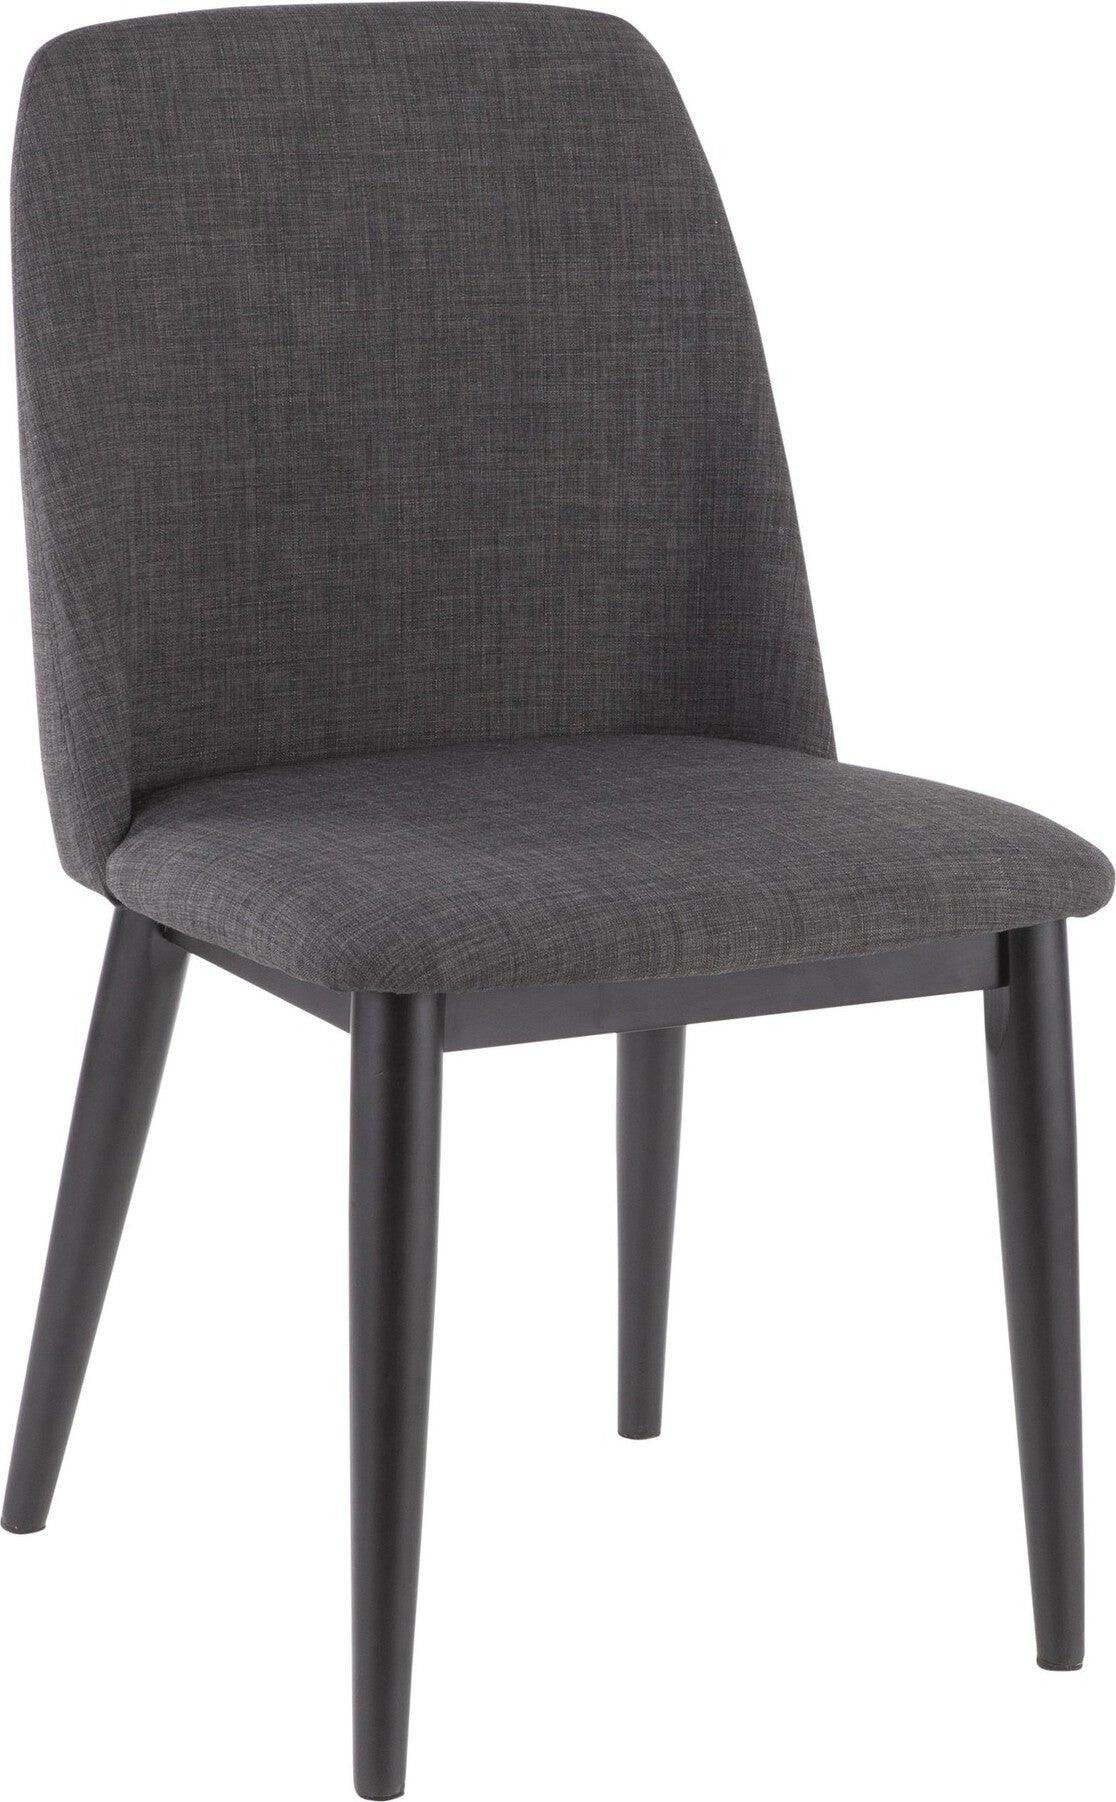 Lumisource Dining Chairs - Tintori Contemporary Dining Chair in Charcoal Fabric (Set of 2)